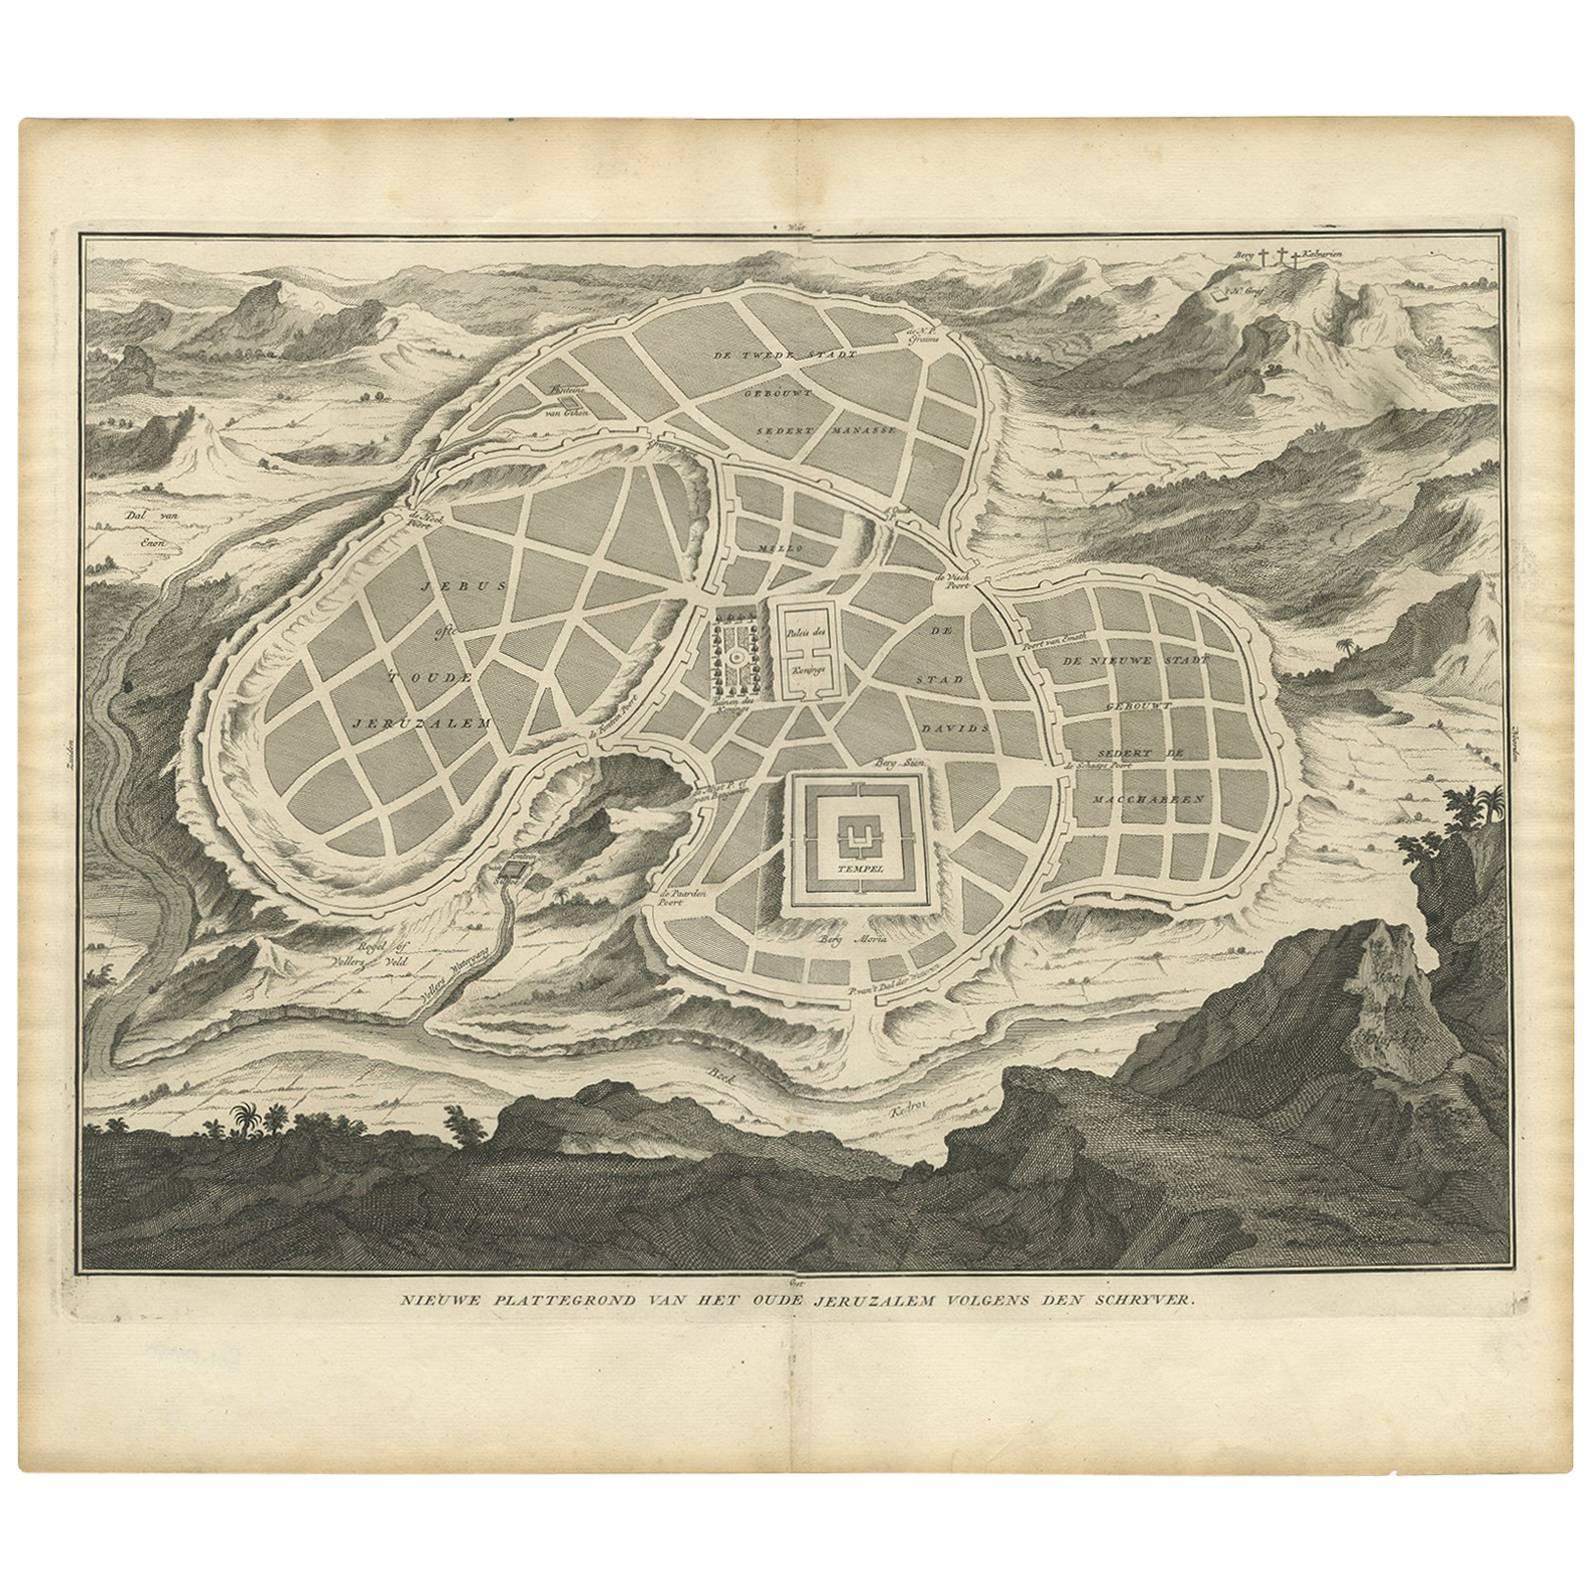 Antique Map of the Ancient City of Jerusalem by A. Calmet, 1725